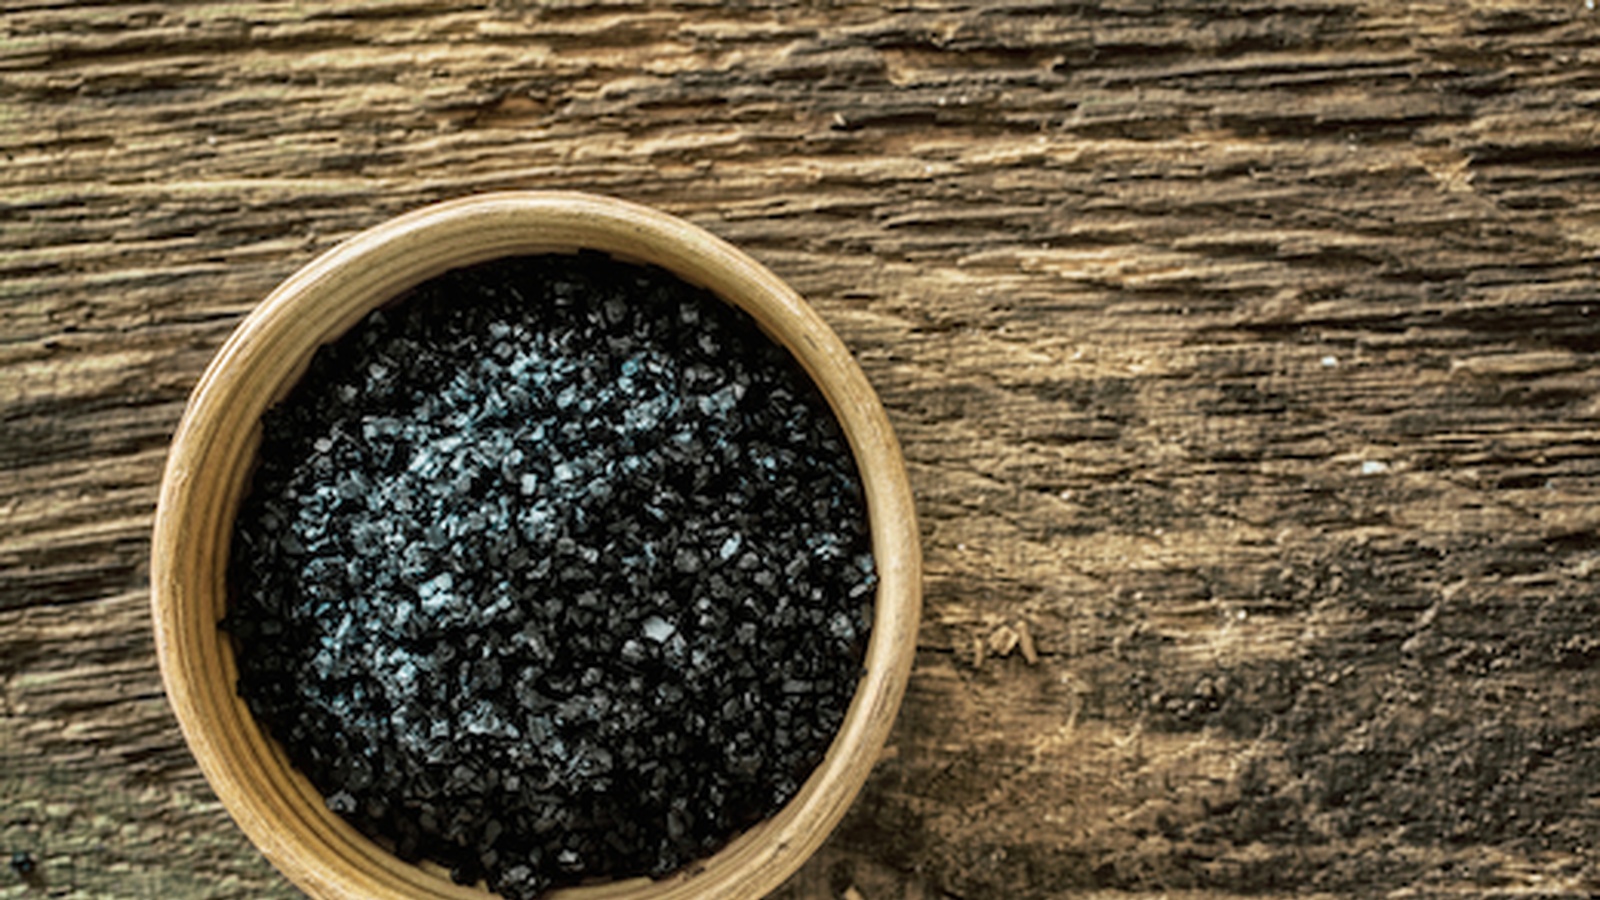 Can Activated Charcoal Detoxify Your Body?